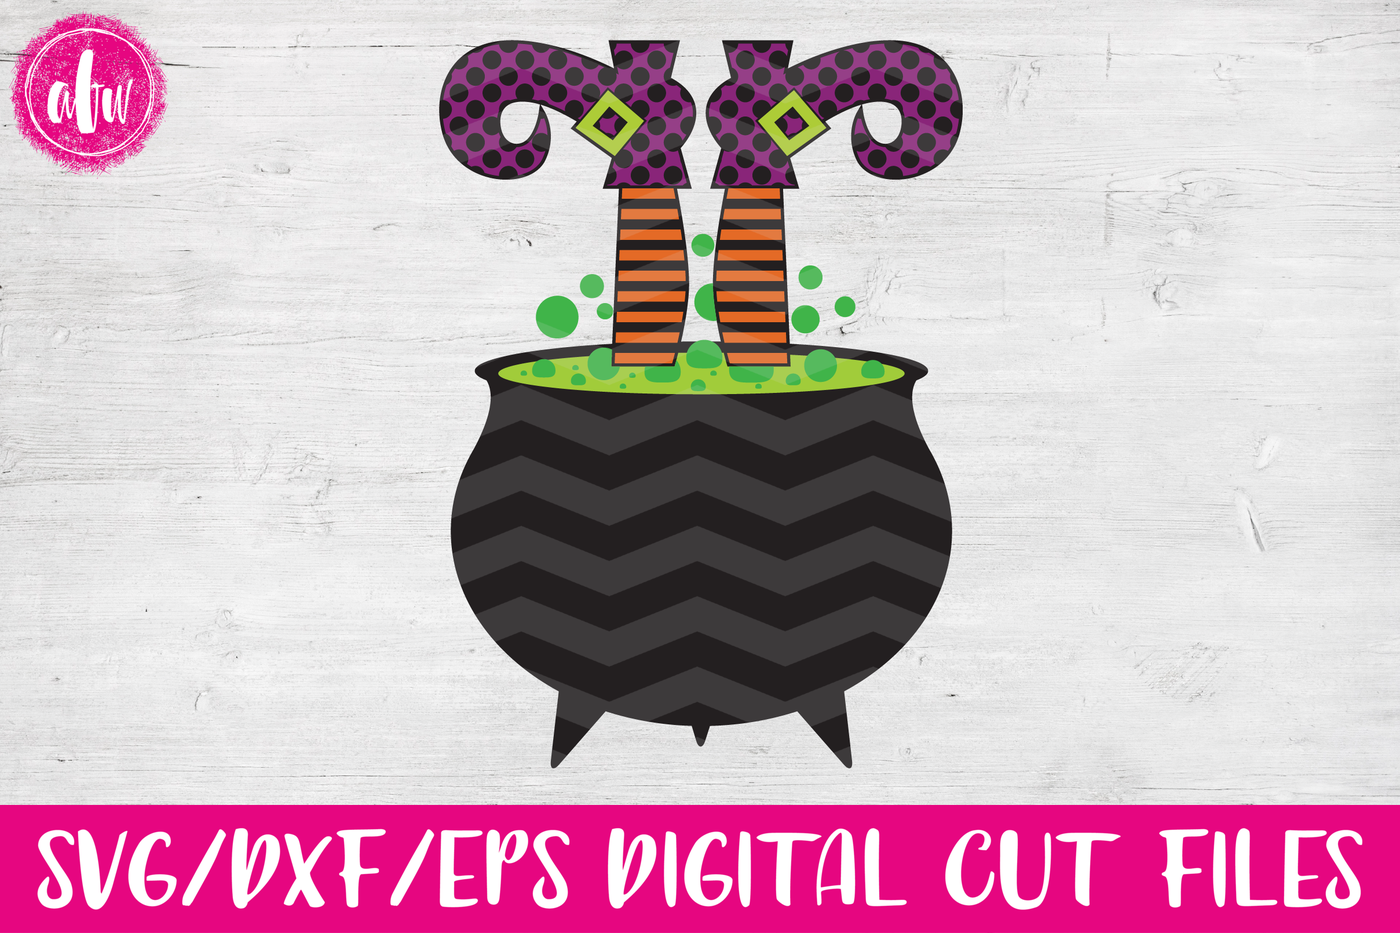 Witch Legs In Cauldron Svg Dxf Eps Cut File By Afw Designs Thehungryjpeg Com